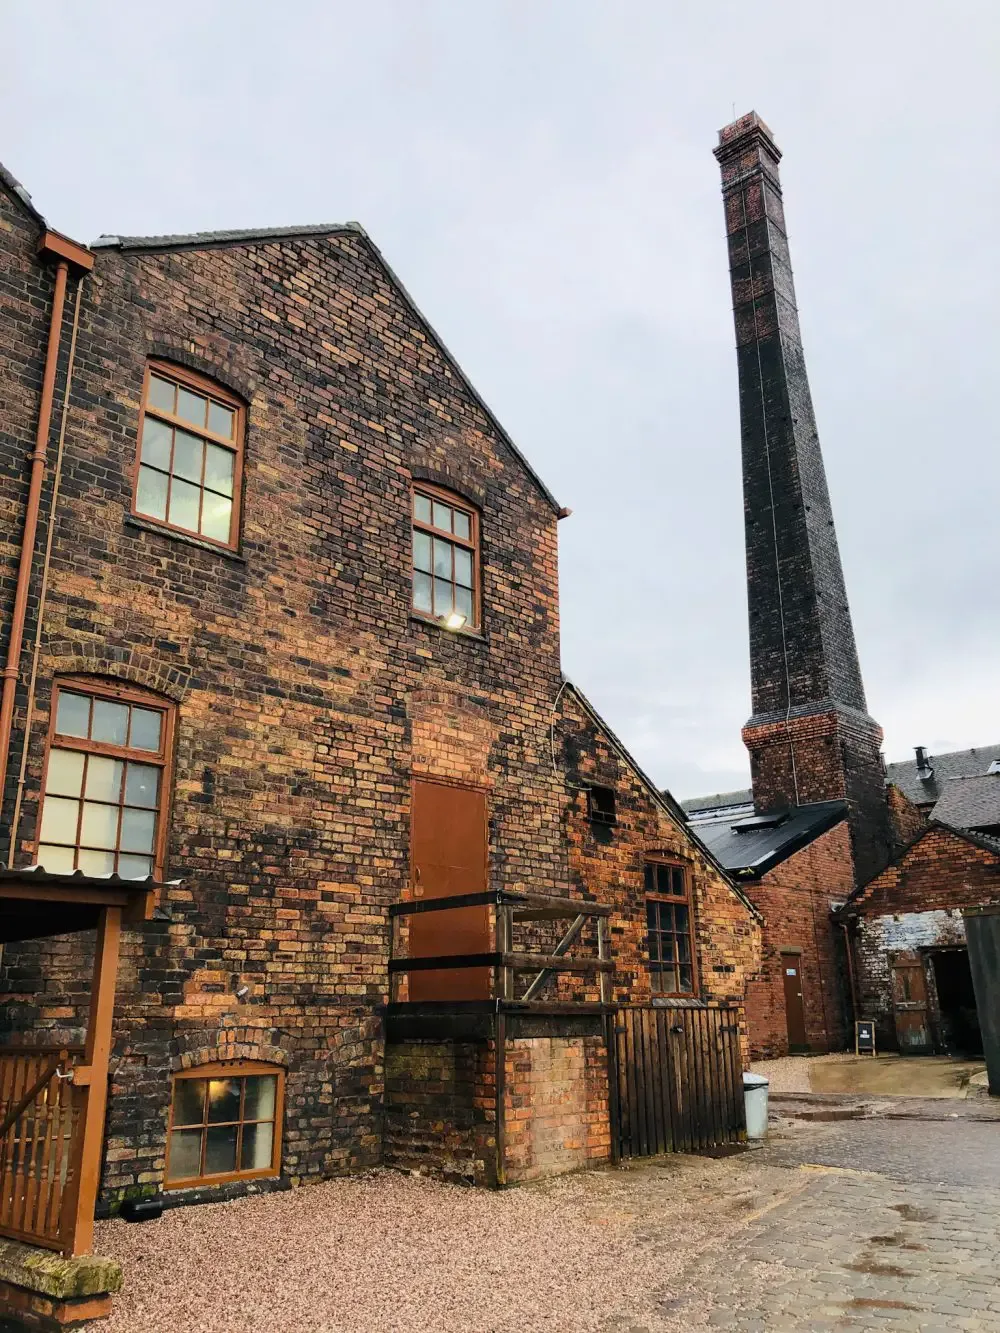 Things to do in Staffordshire with kids, visiting Middleport Pottery a great family day out